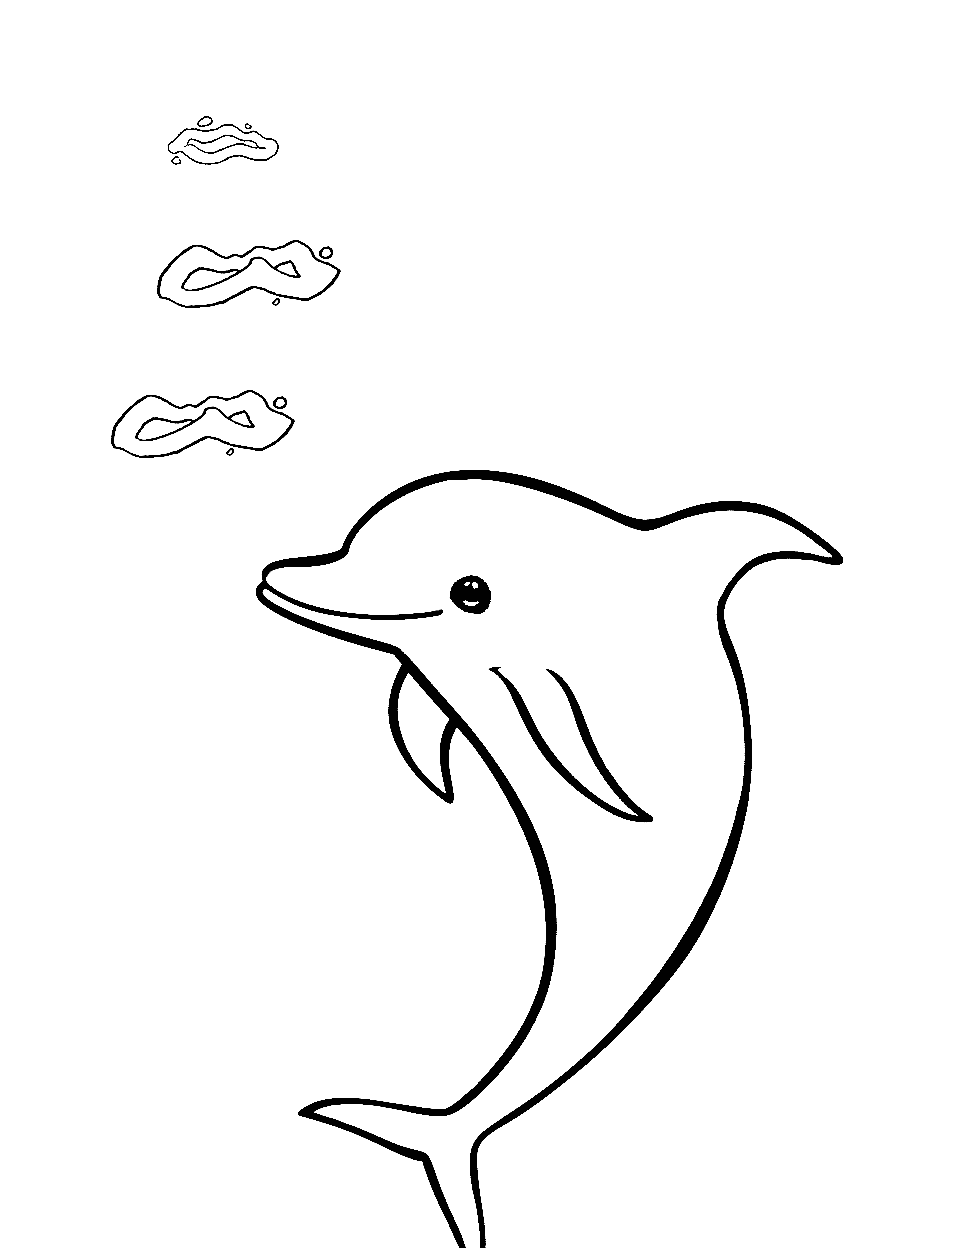 Dolphin Bubble Rings Coloring Page - A dolphin creating enchanting bubble rings.